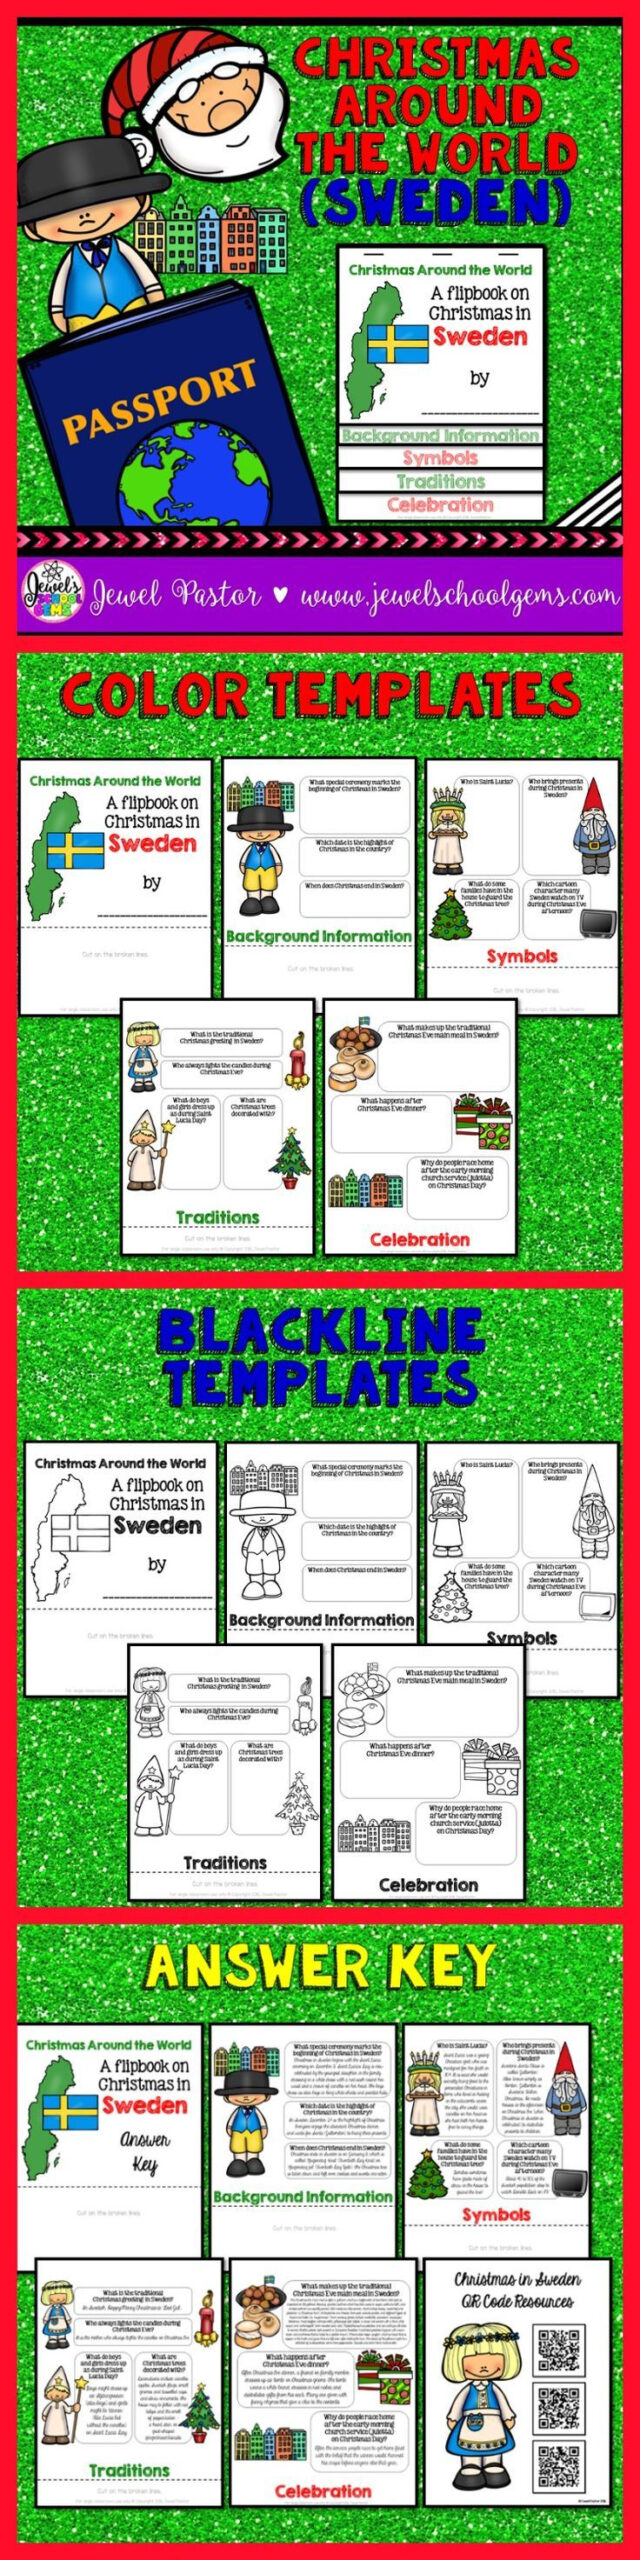 Christmas Around The World Research Project (Christmas In